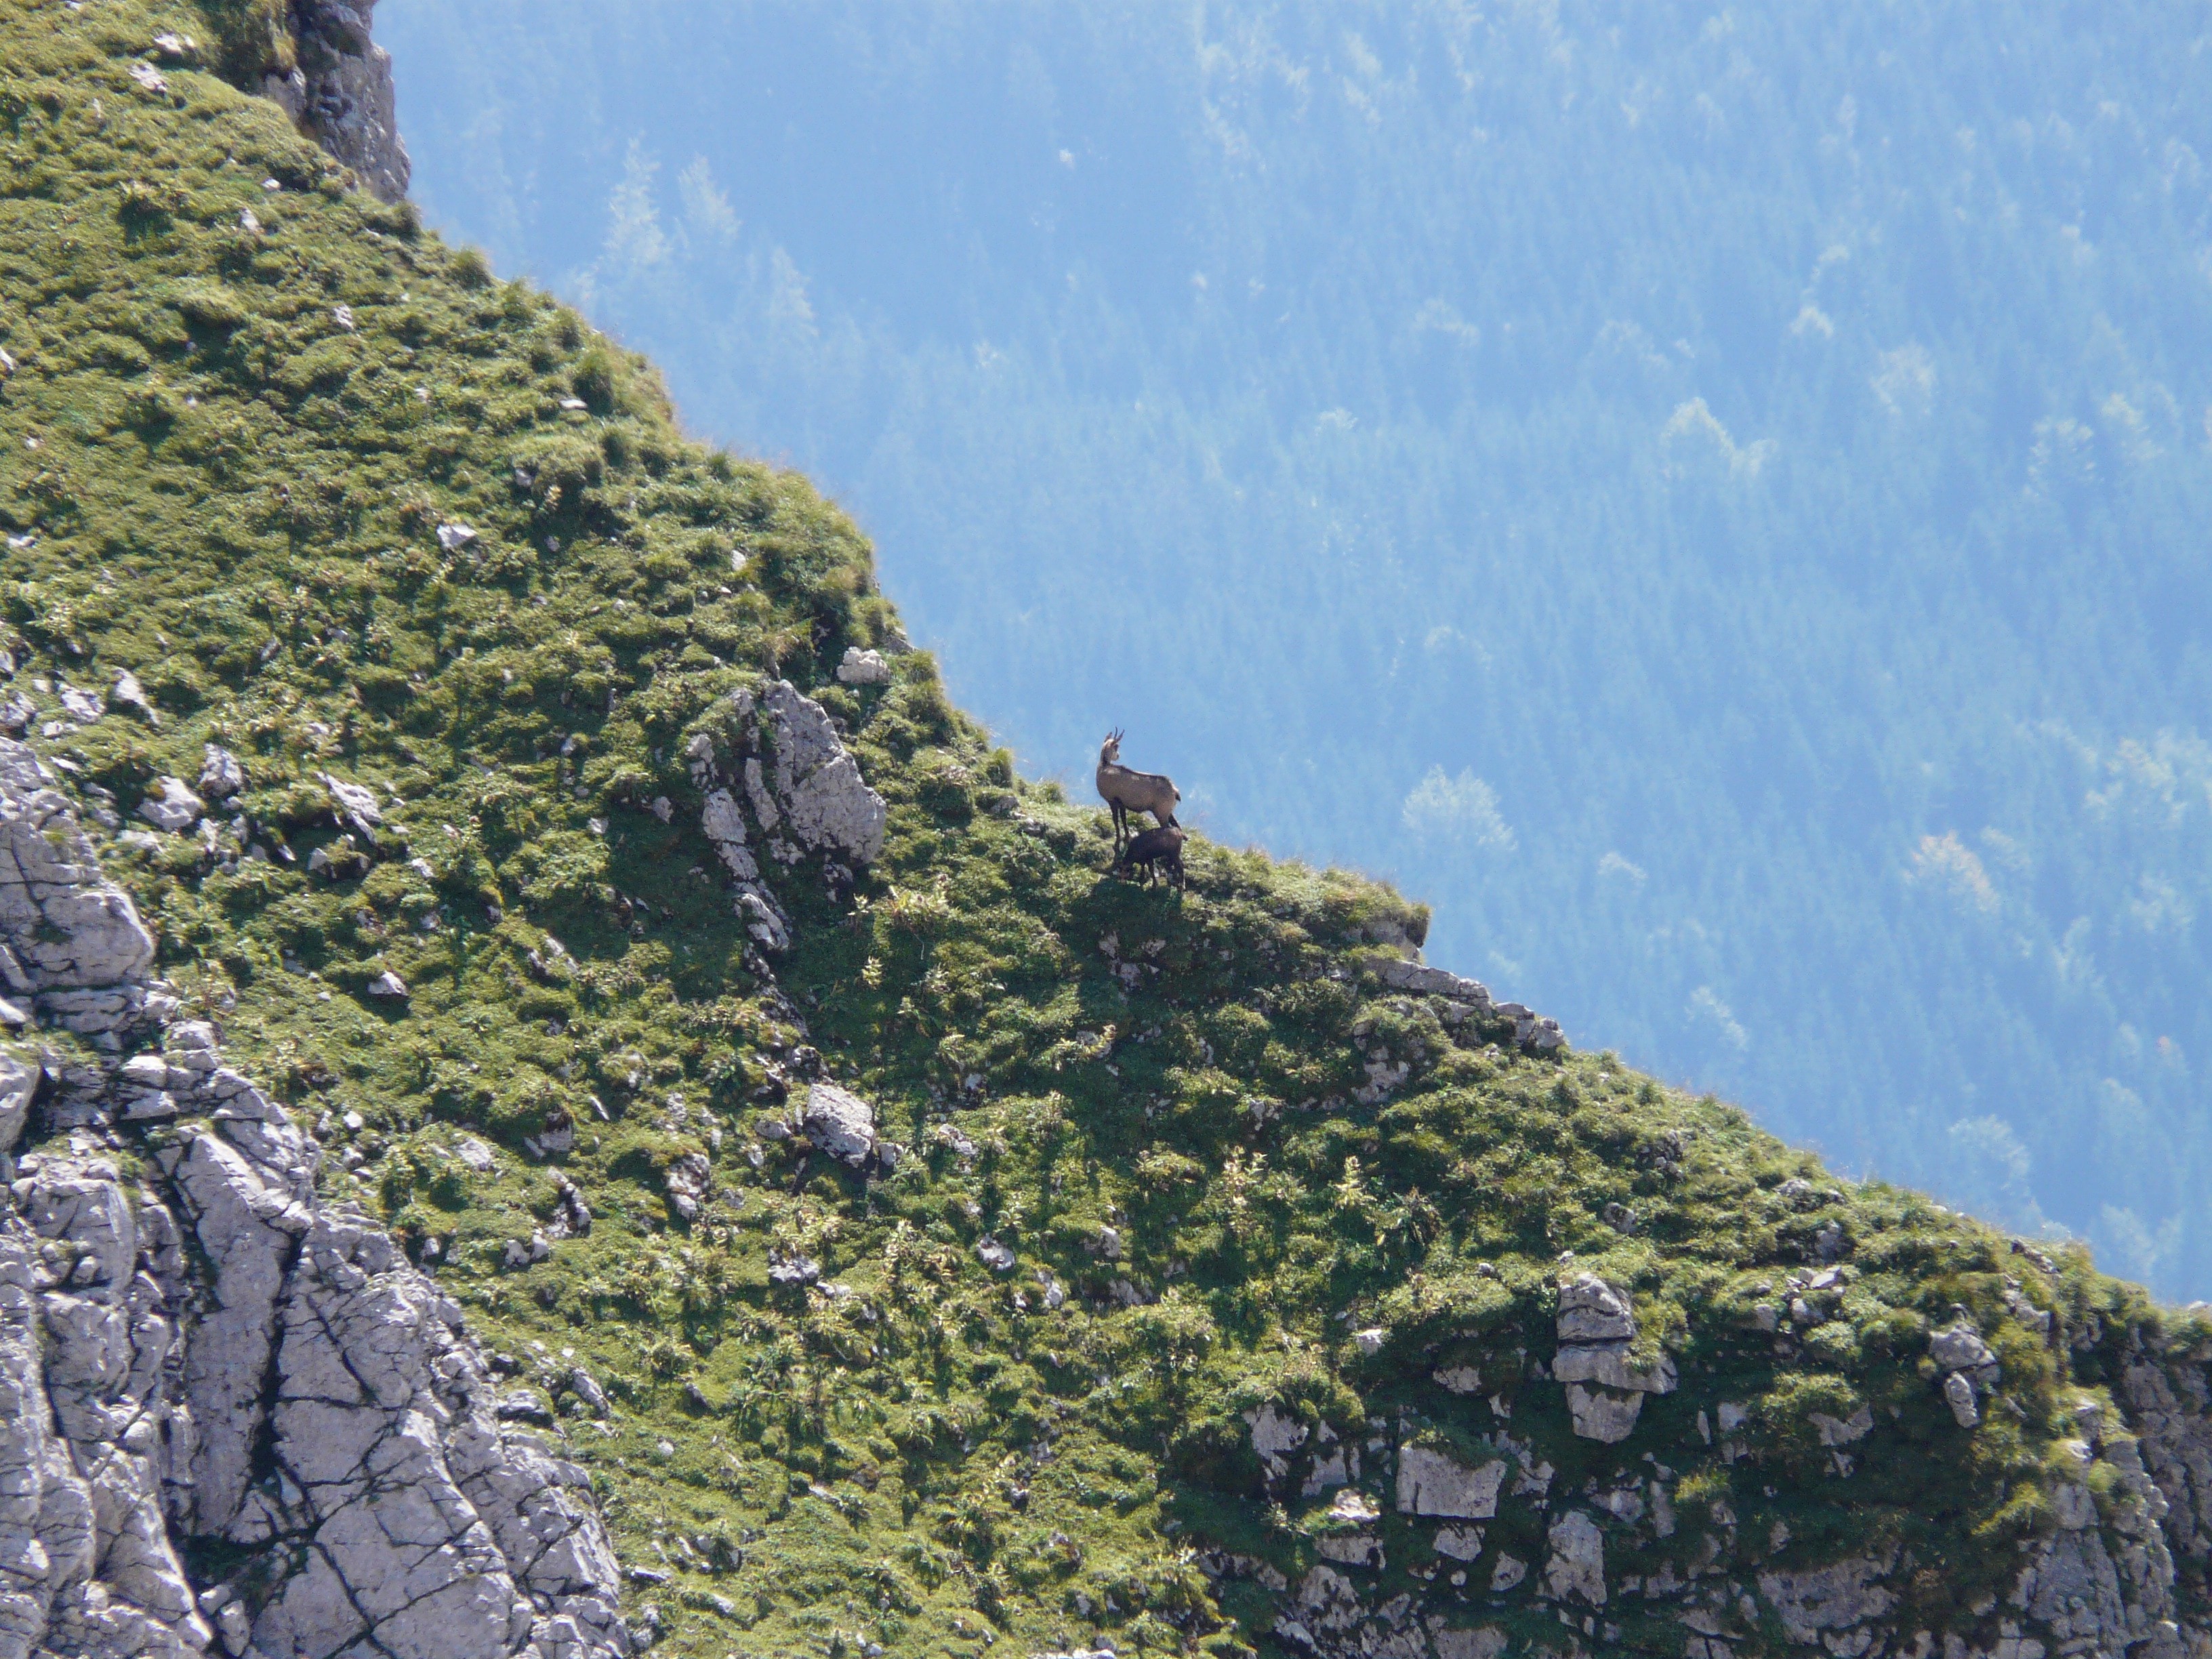 Chamois, Gams, Rupicapra Rupicapra, Goat, day, no people